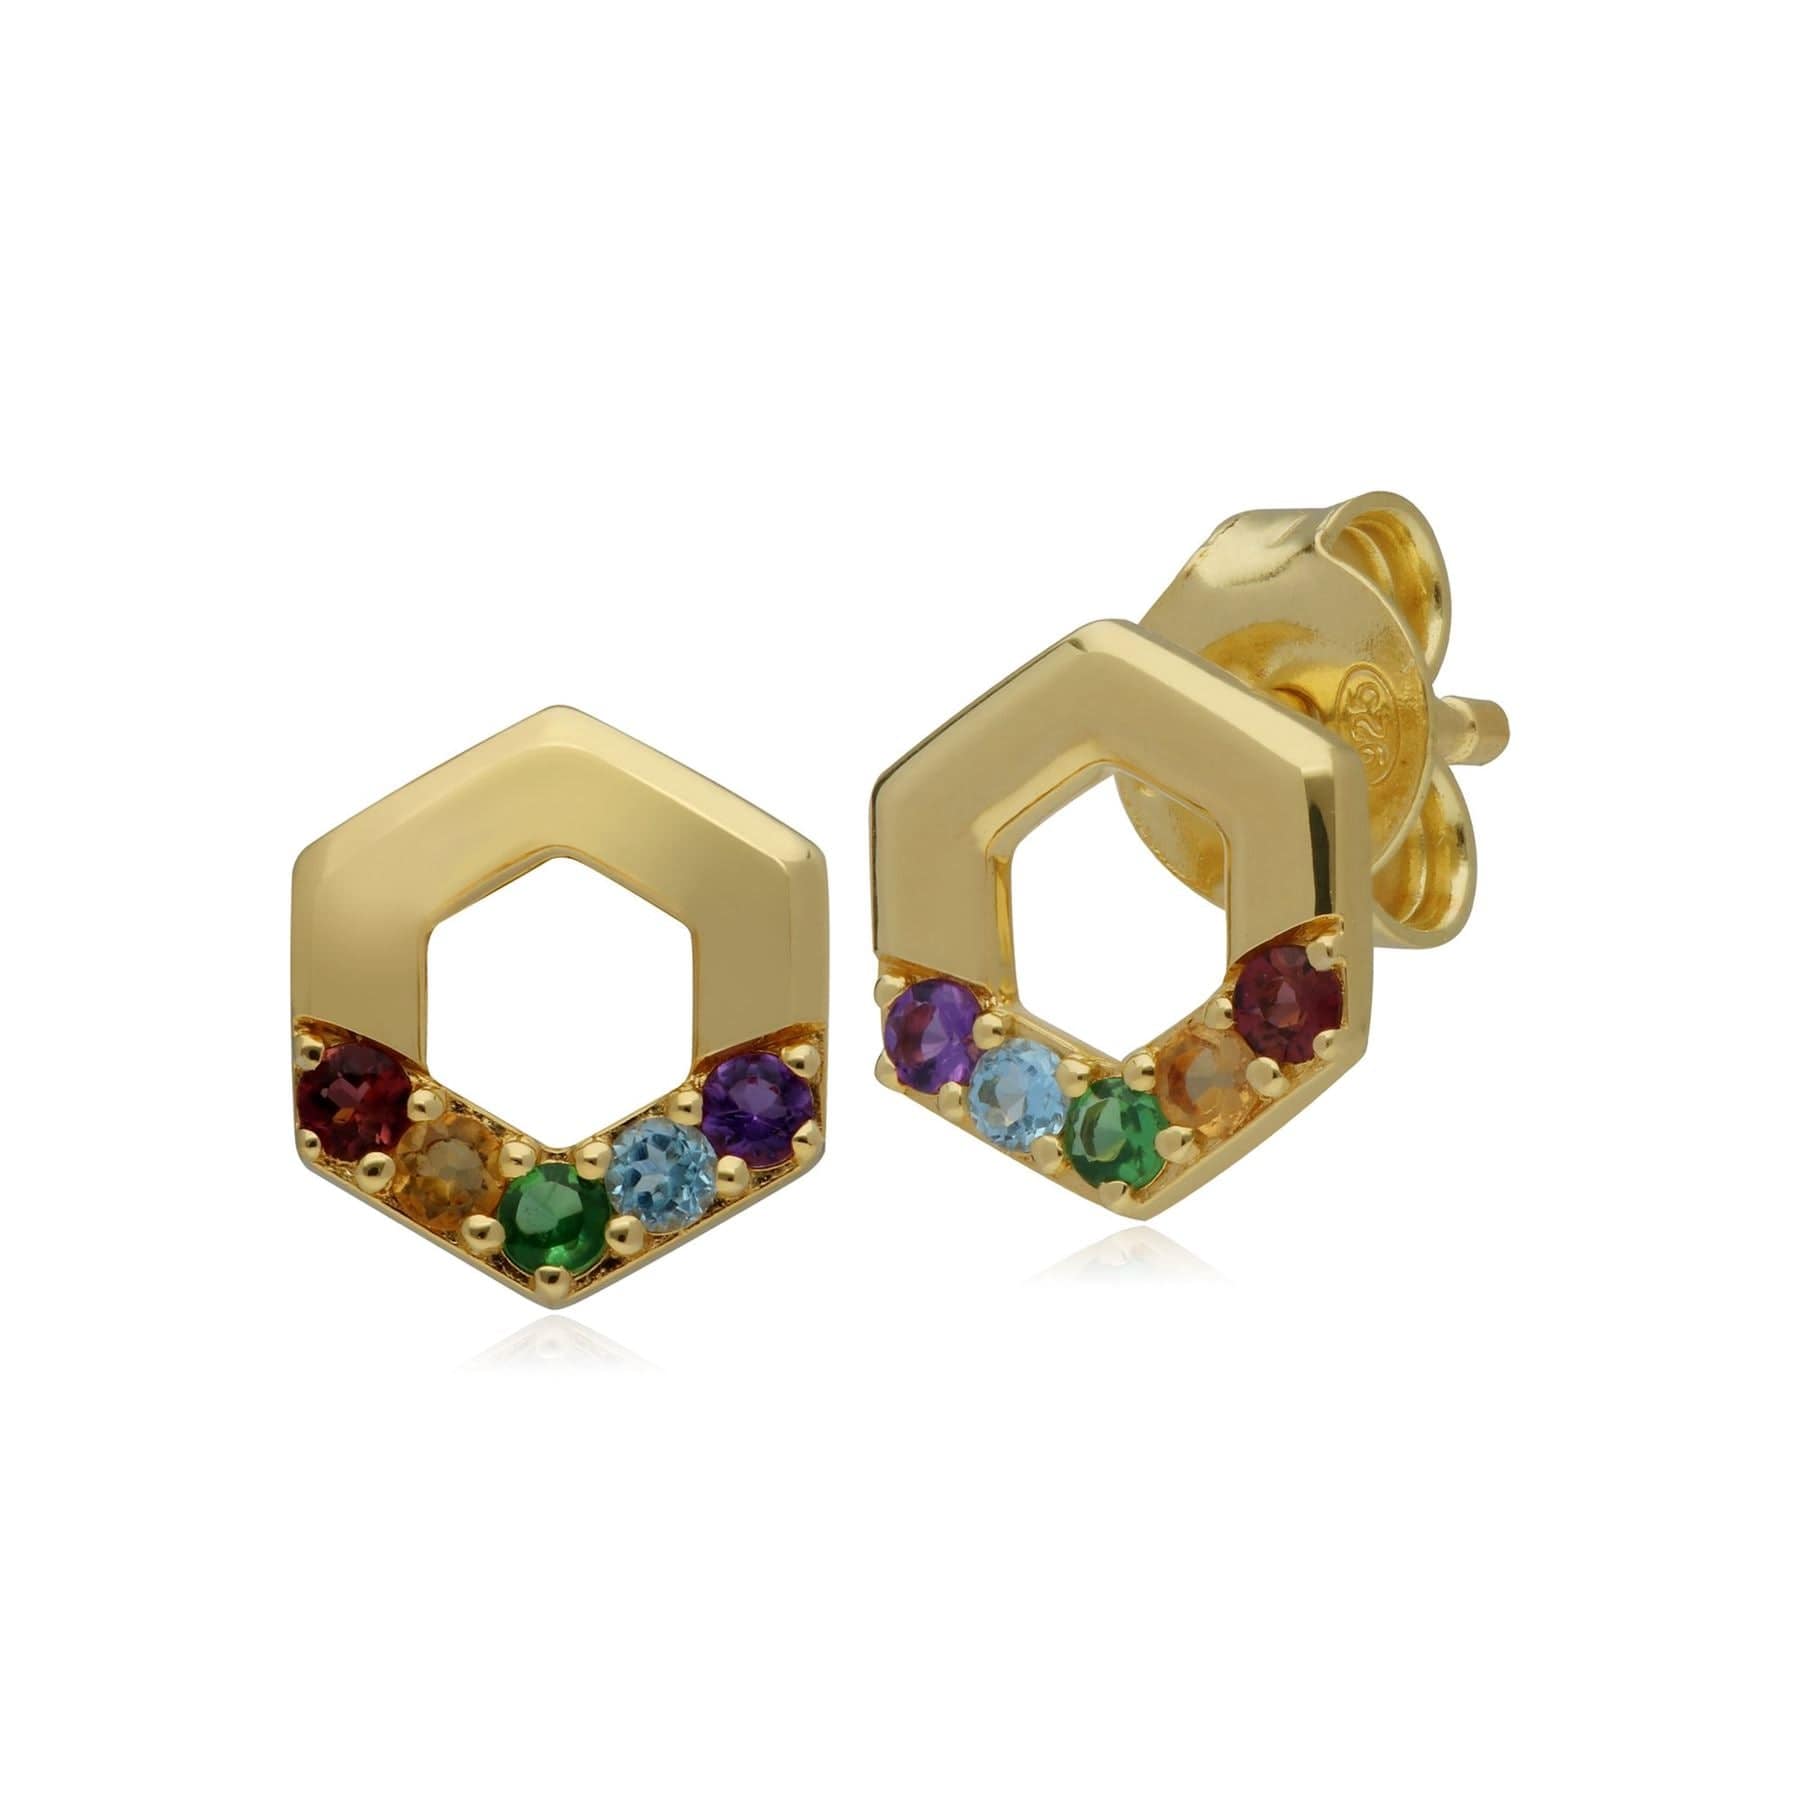 Image of Rainbow Hexagon Stud Earrings in Gold Plated Sterling Silver